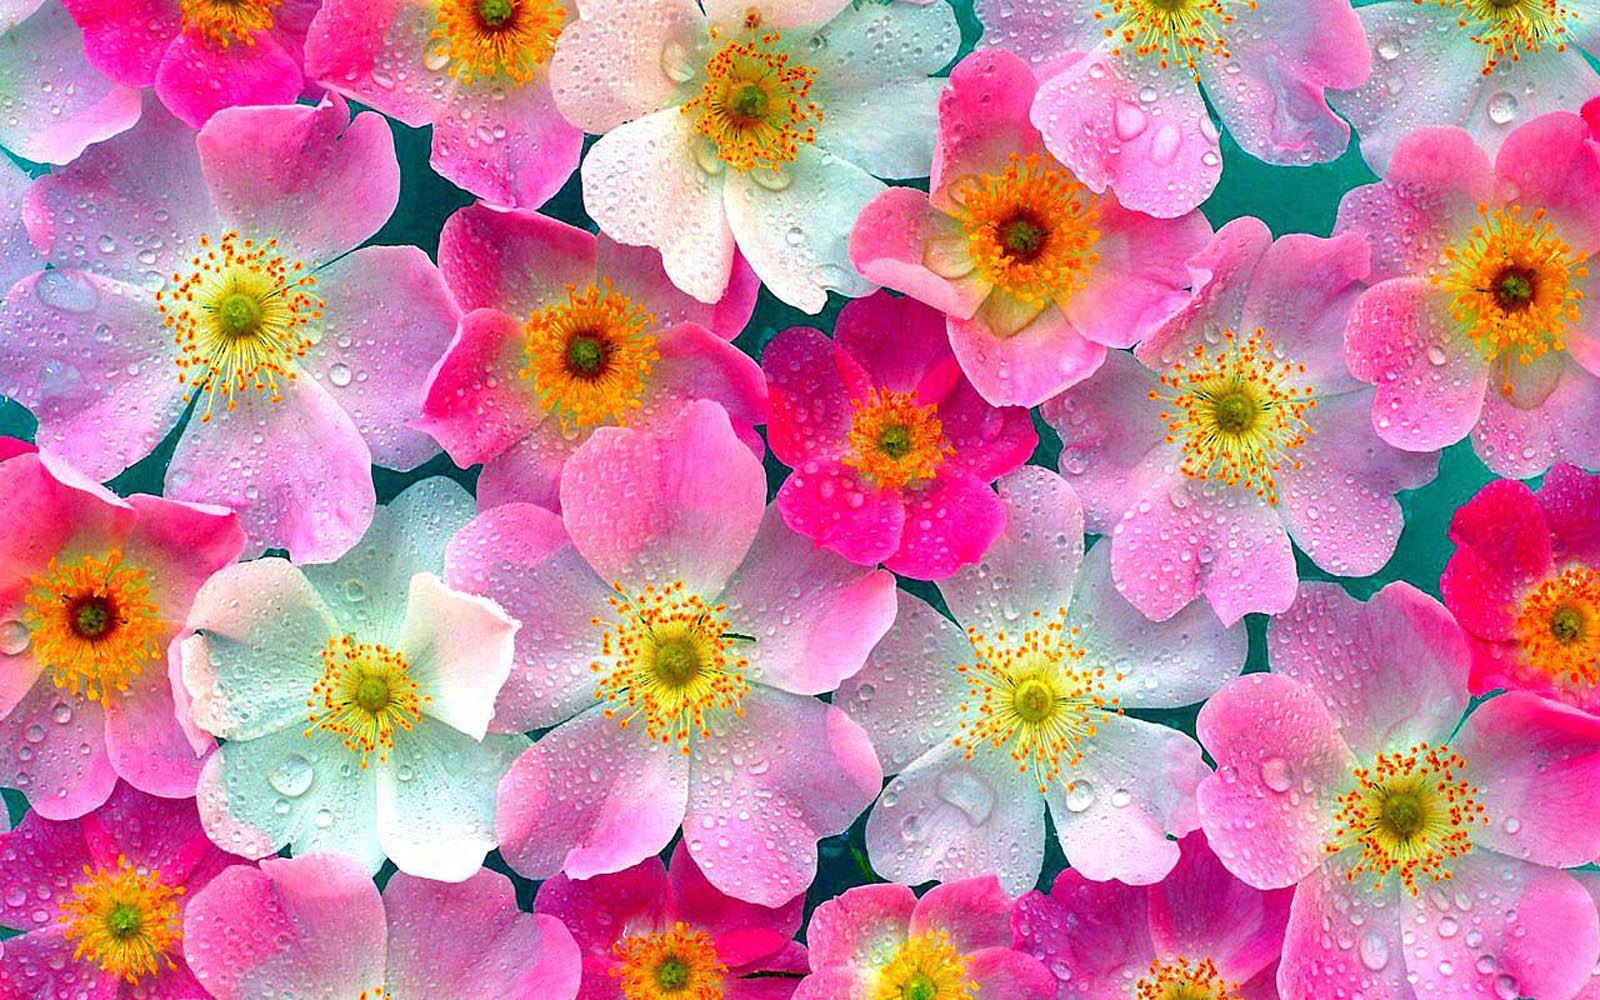 Share Flower Wallpaper Gallery To The